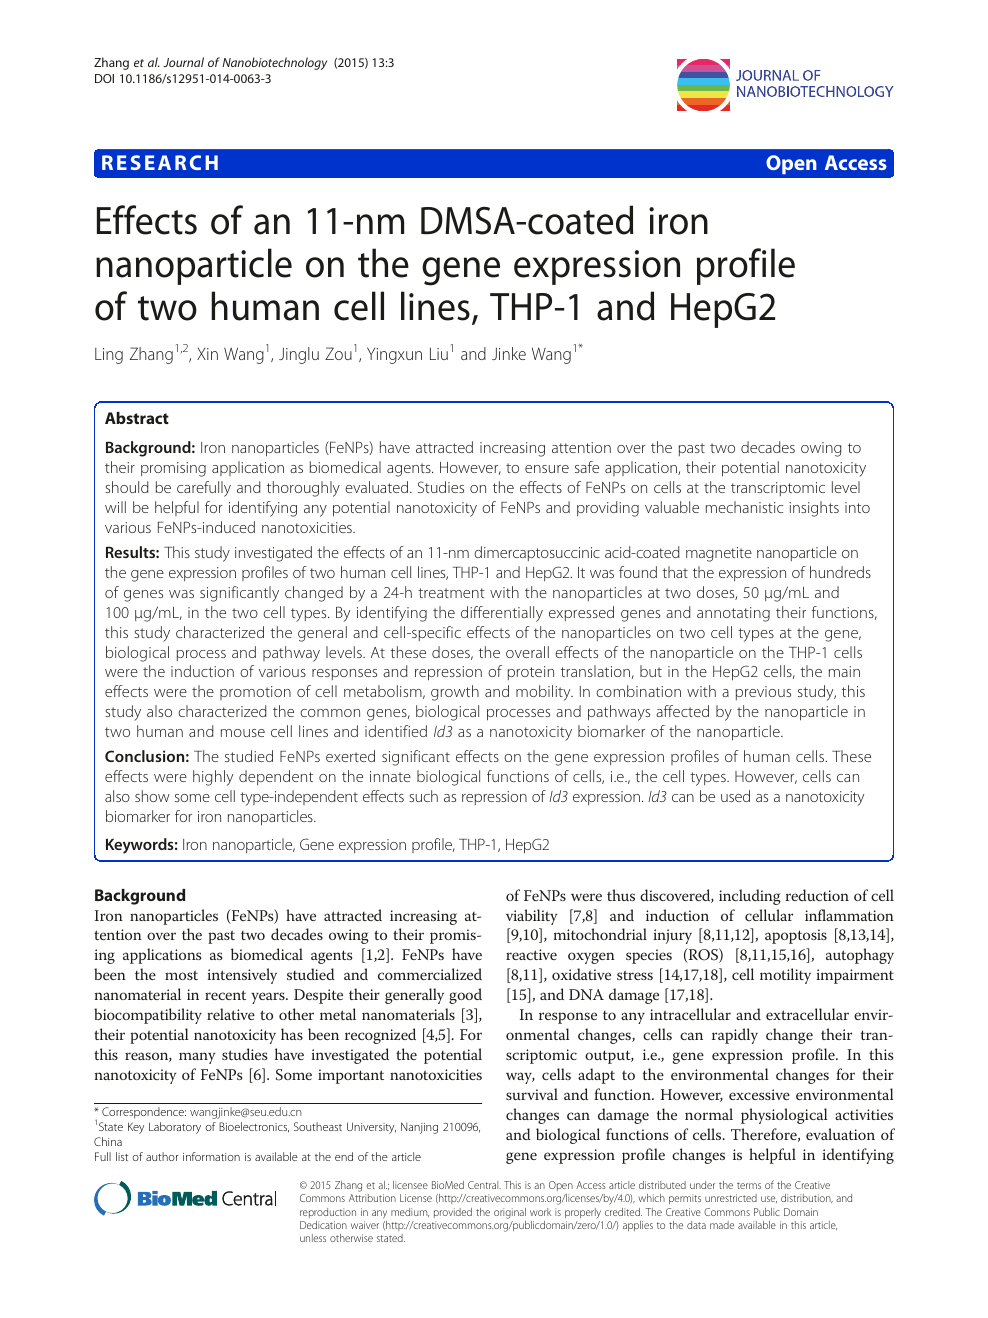 Effects Of An 11 Nm Dmsa Coated Iron Nanoparticle On The Gene Expression Profile Of Two Human Cell Lines Thp 1 And Hepg2 Topic Of Research Paper In Biological Sciences Download Scholarly Article Pdf